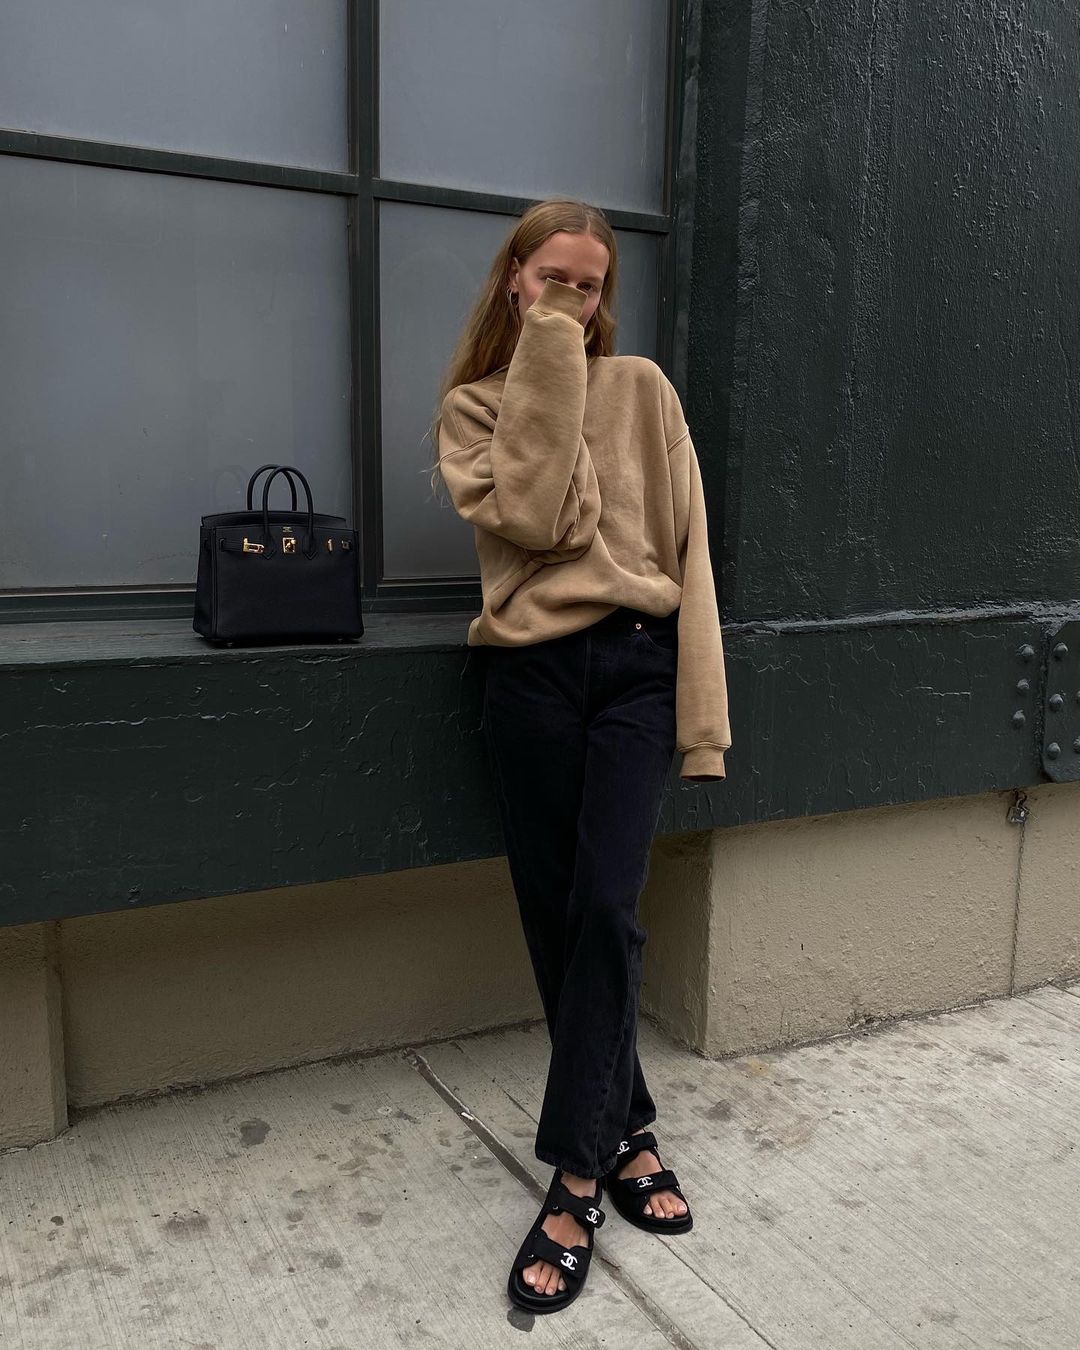 25 Basic Yet Cool Sweatshirts to Shop Now — Instagram outfit idea — @mvb Marie von Behrens in a tan sweatshirt, an Hermès bag, black jeans, and Chanel dad sandals